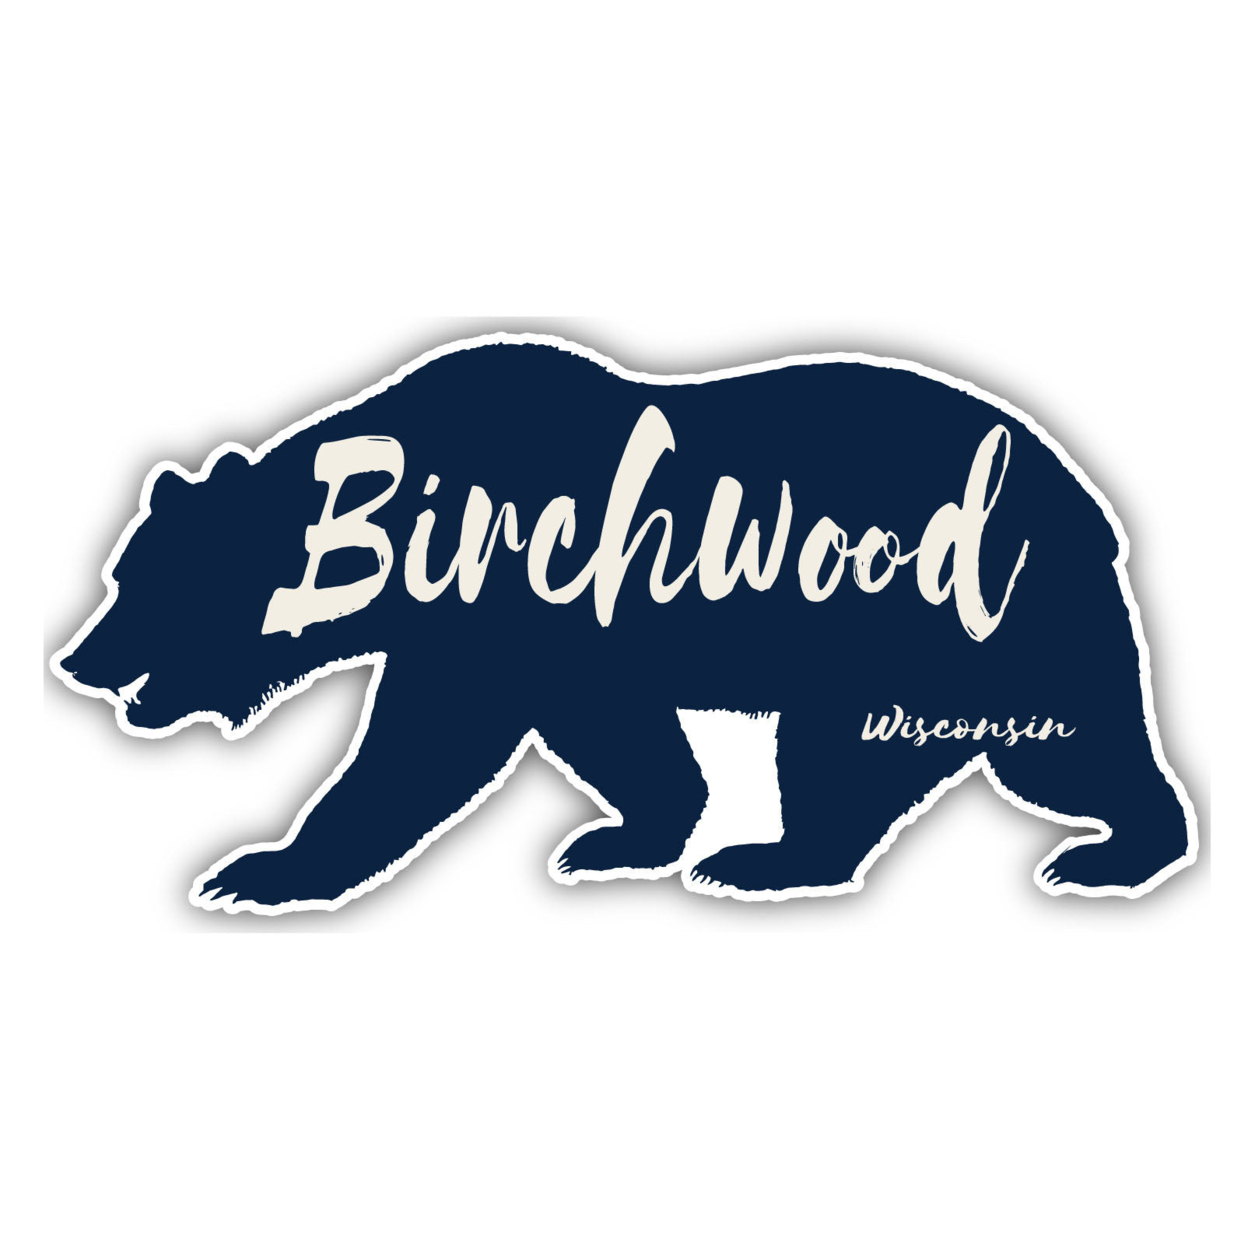 Birchwood Wisconsin Souvenir Decorative Stickers (Choose Theme And Size) - 4-Pack, 6-Inch, Bear